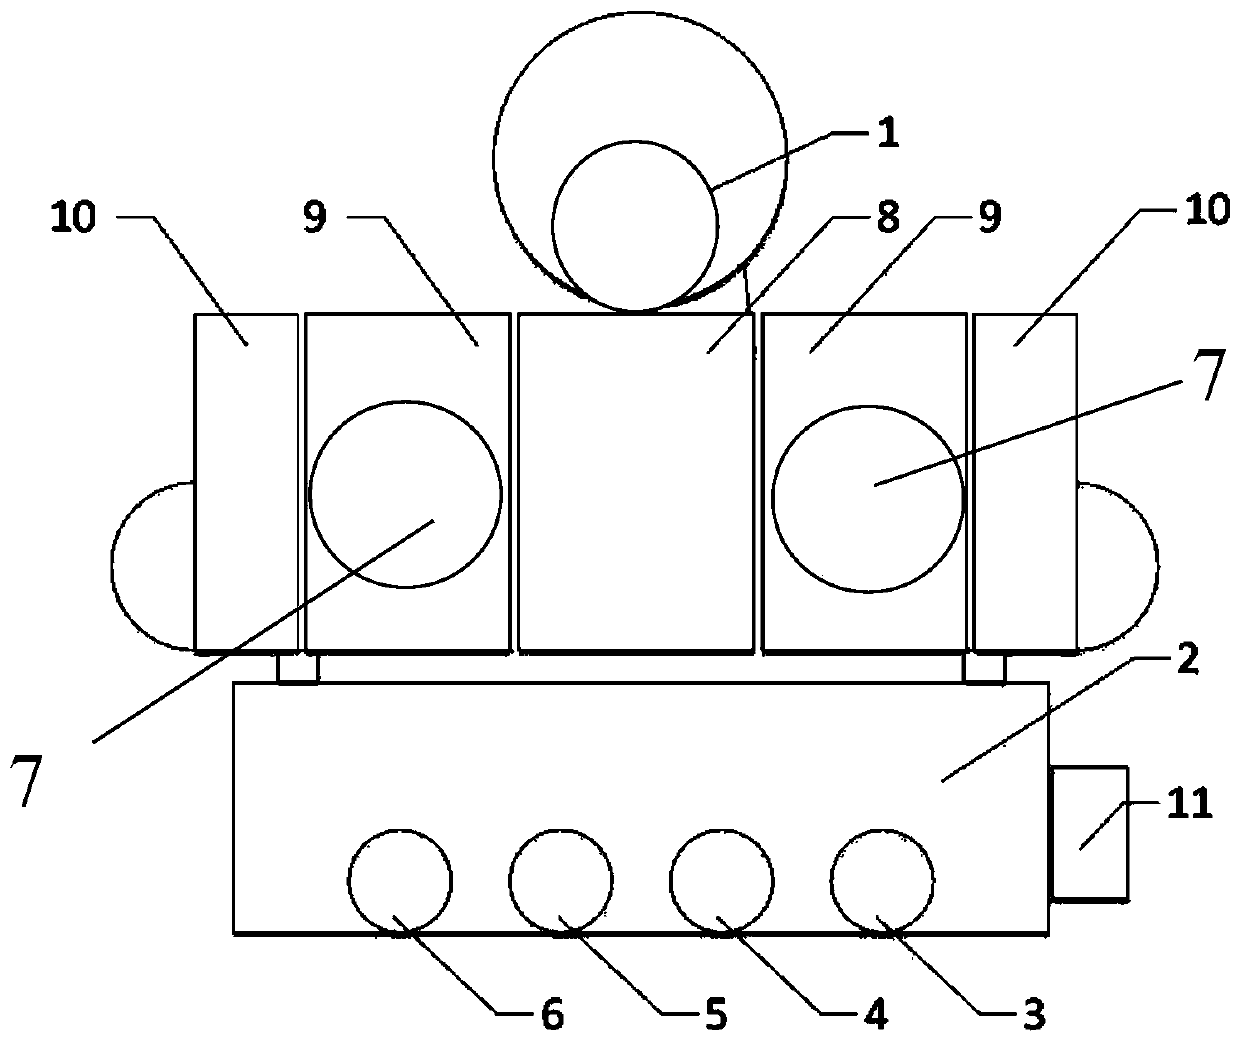 Pressurizing and inter-cooling integration device used for V type engine